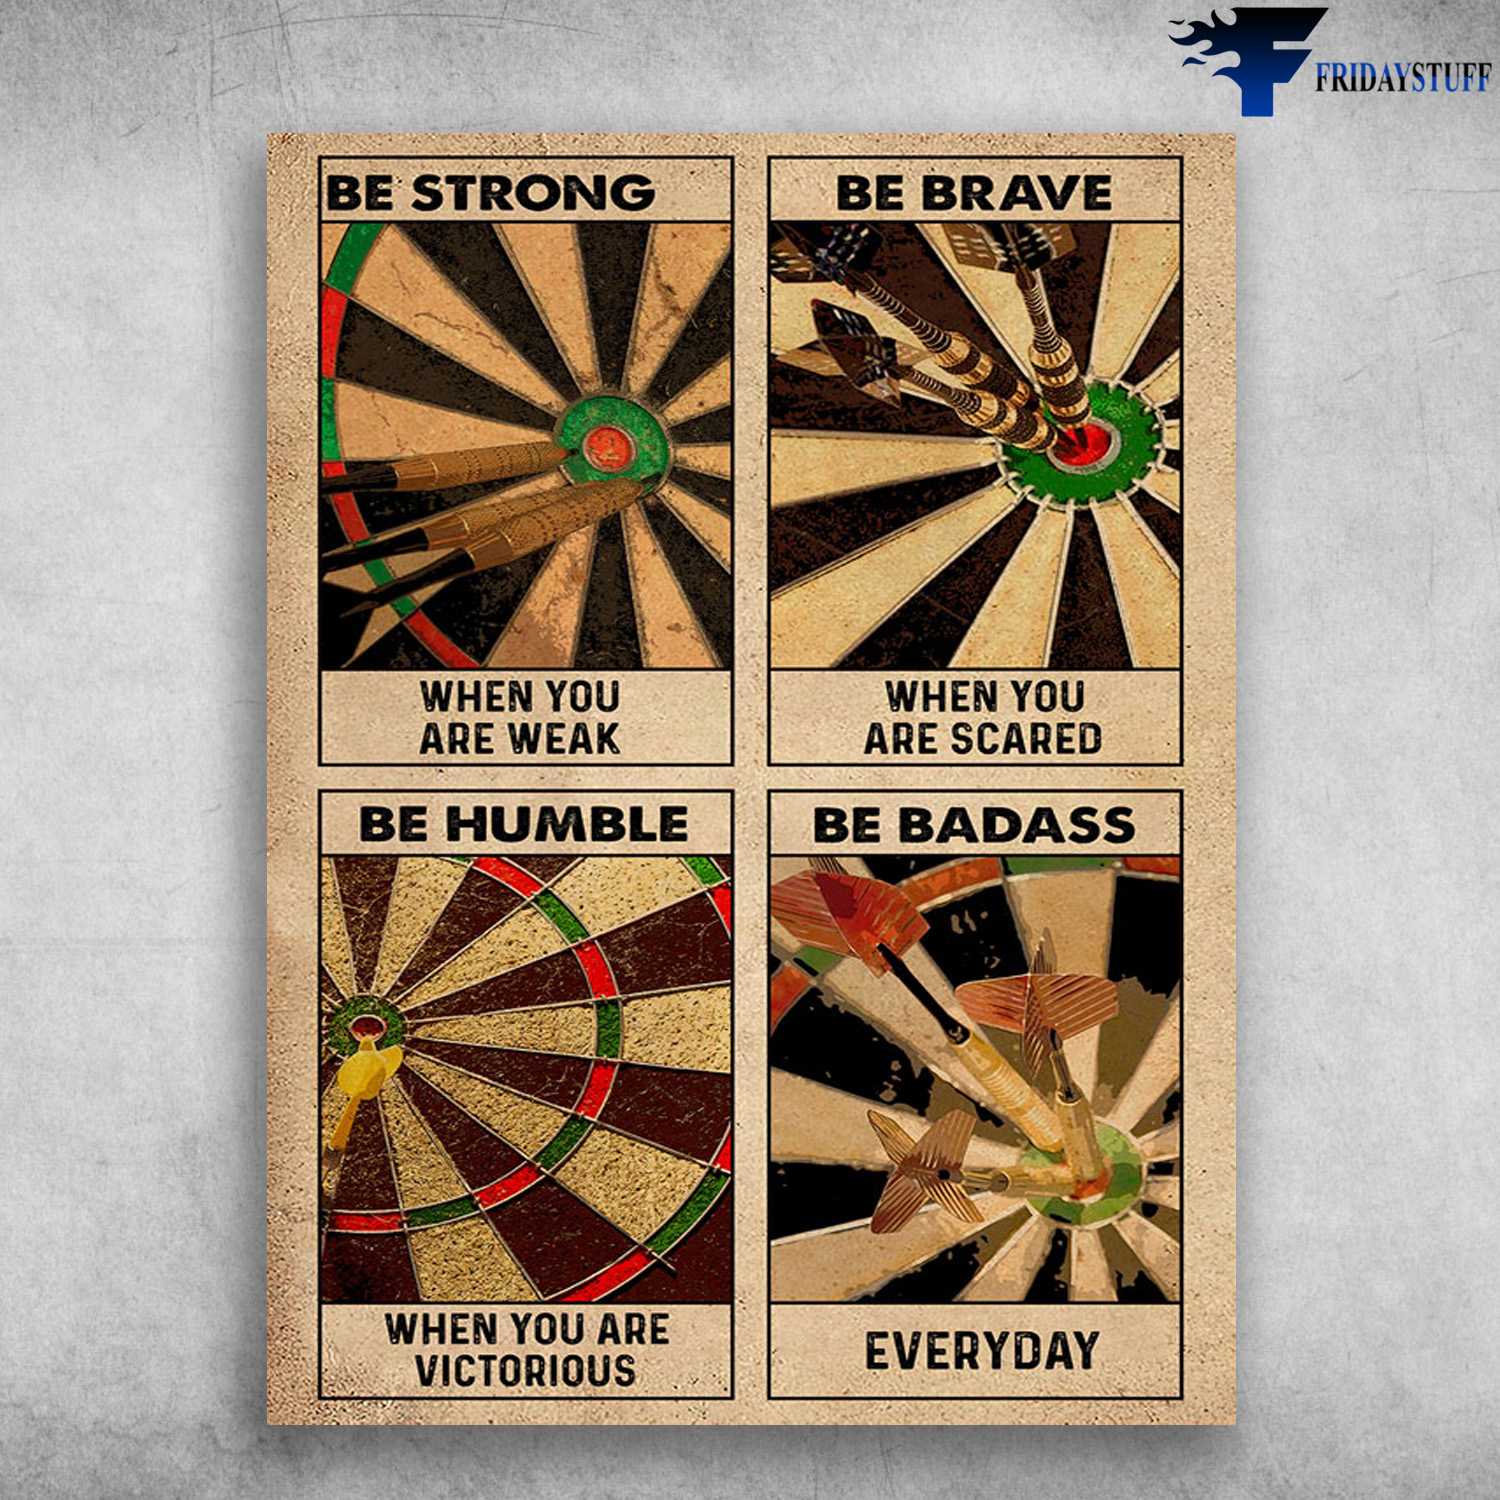 Darts Poster, Darts Lover - Be Strong When You Are Weak, Be Brave When You Are Scared, Be Humble When You Are Victorious, Be Badass Everyday